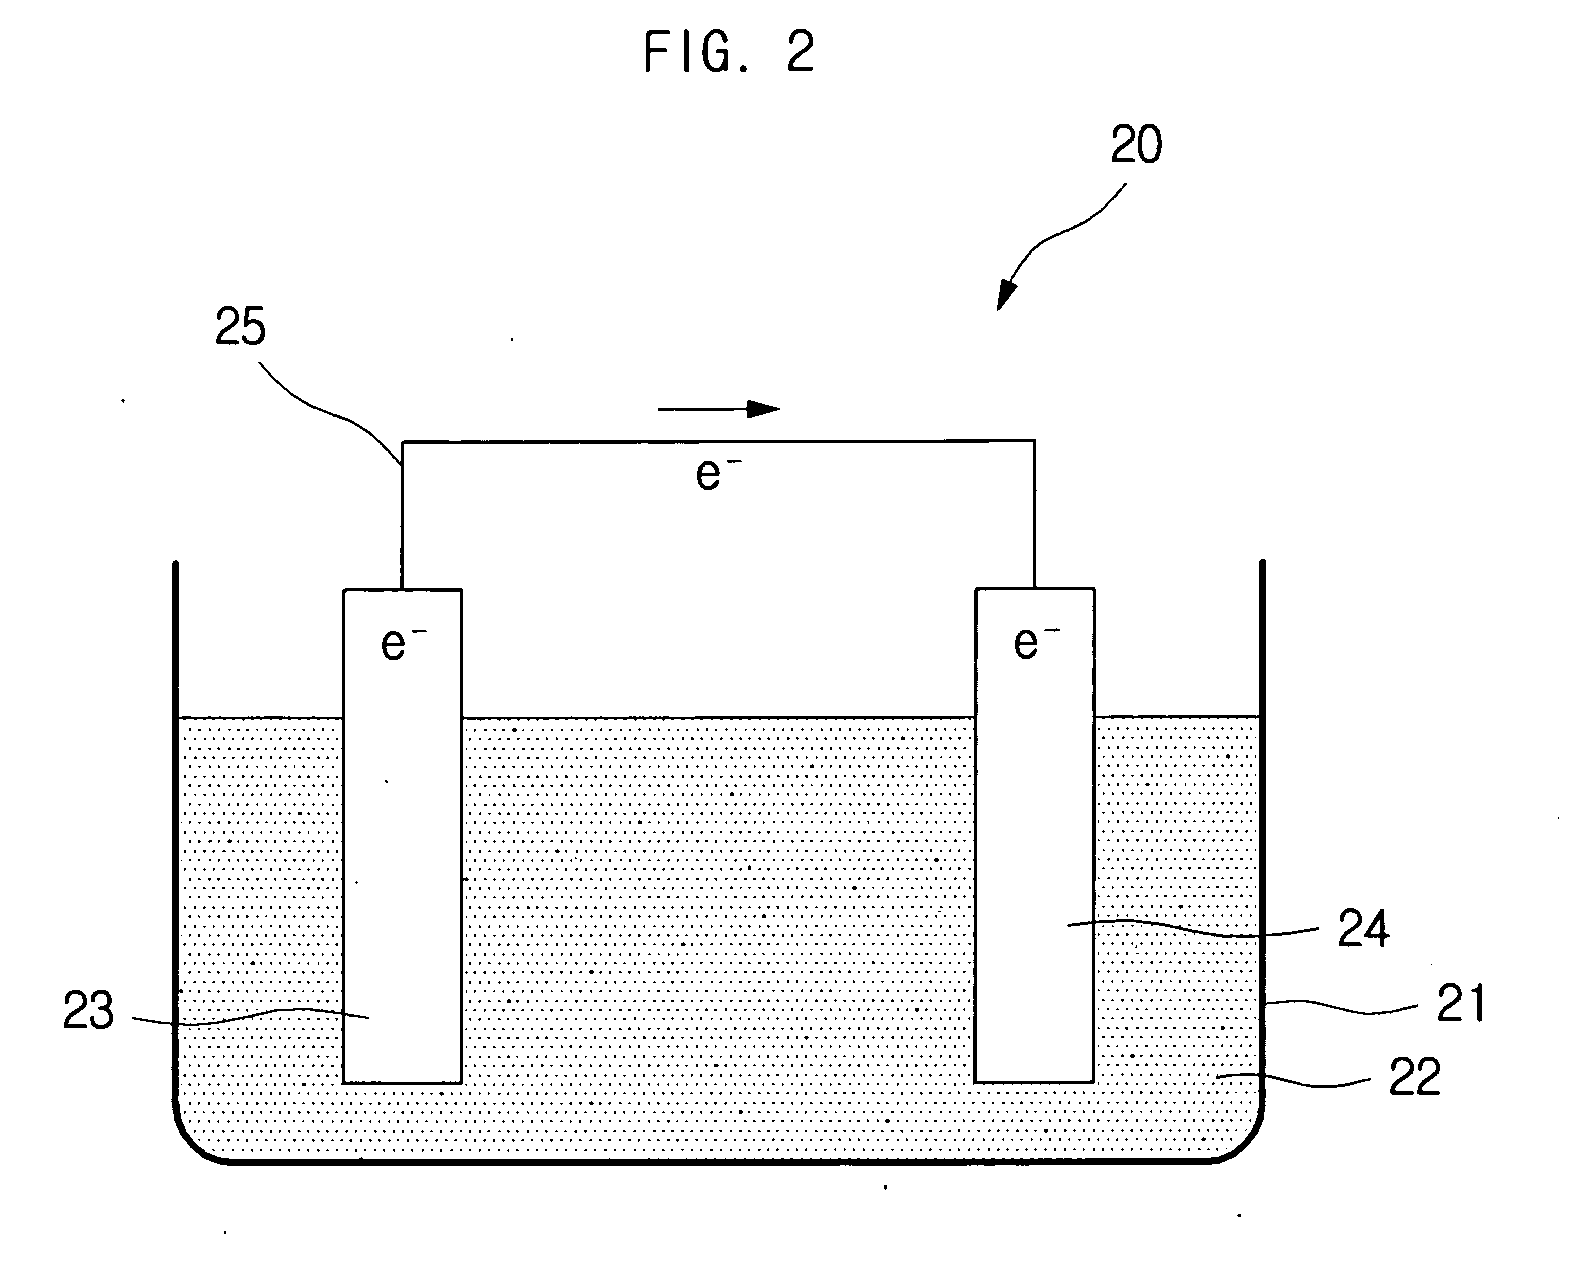 Metal composite electrode for a hydrogen generating apparatus